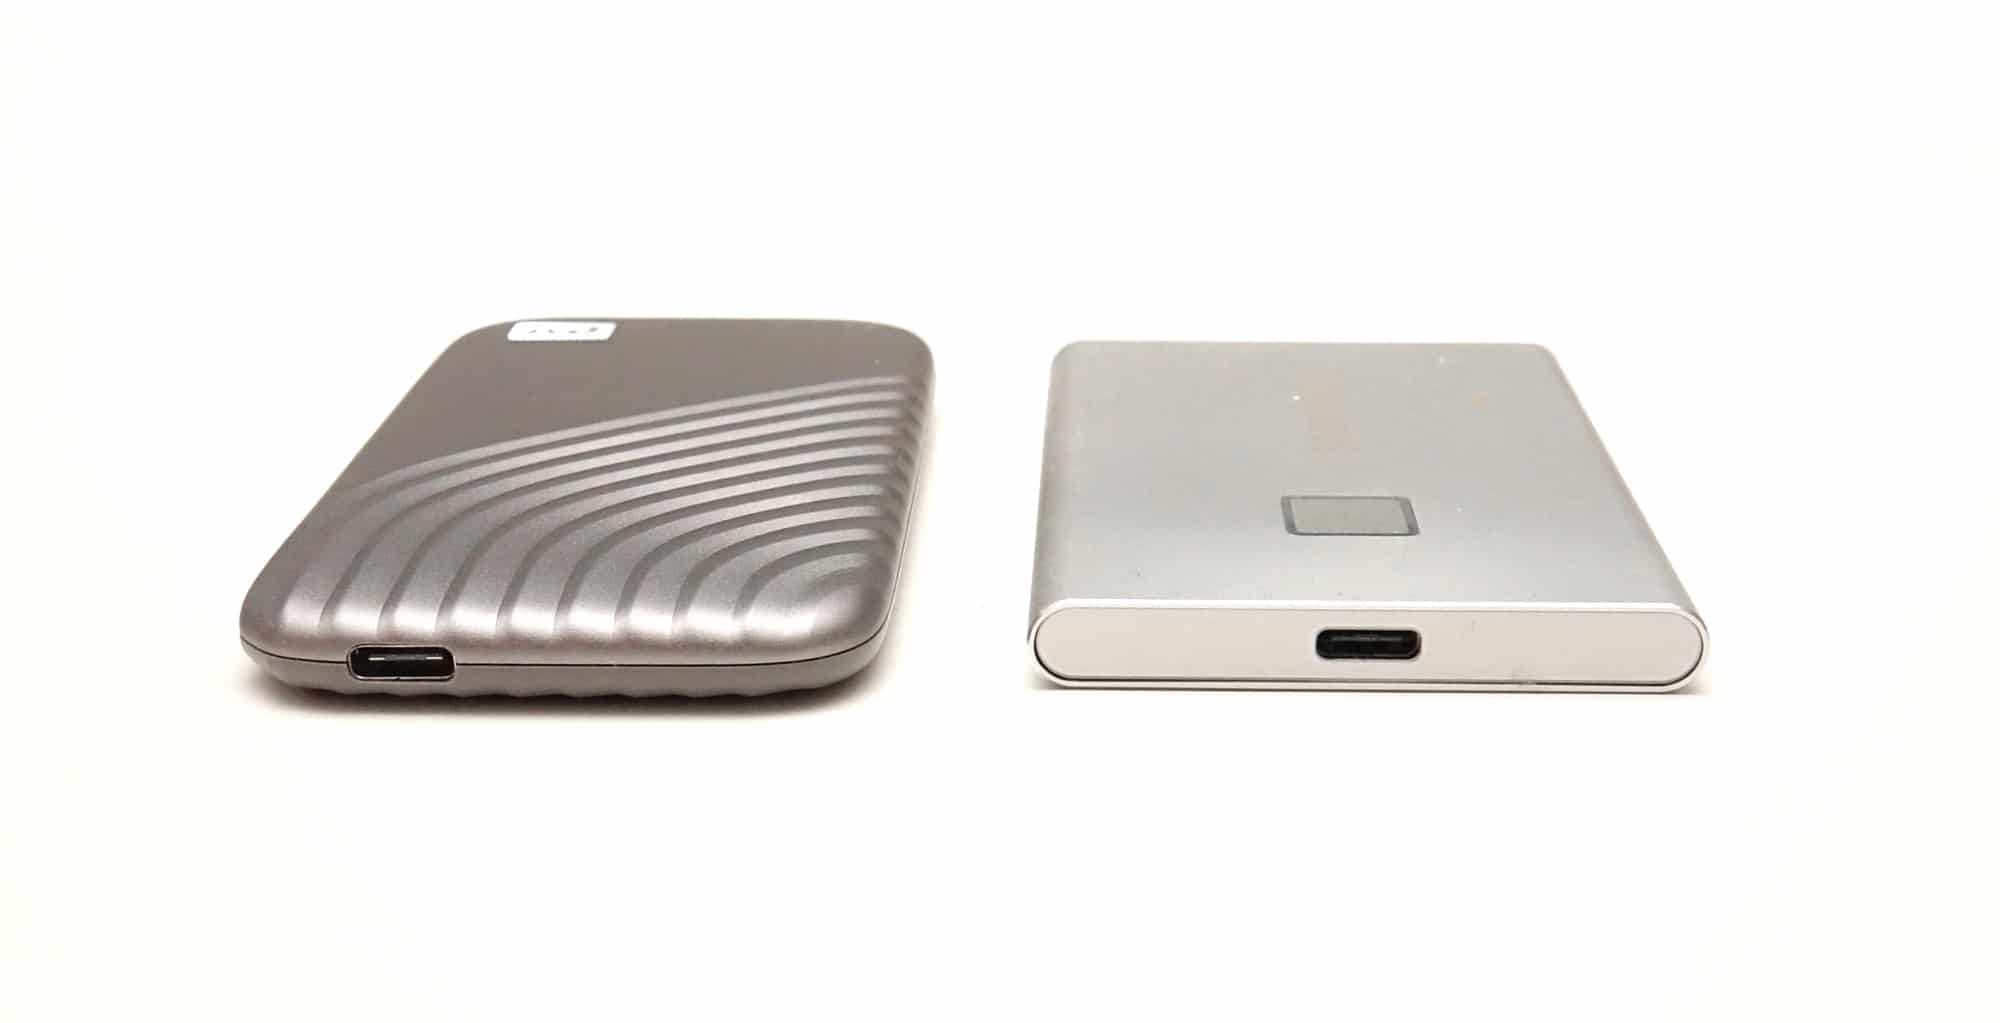 The same USB Type C port connector on both the WD My Passport SSD (left) and the Samsung T7 Touch SSD (right)